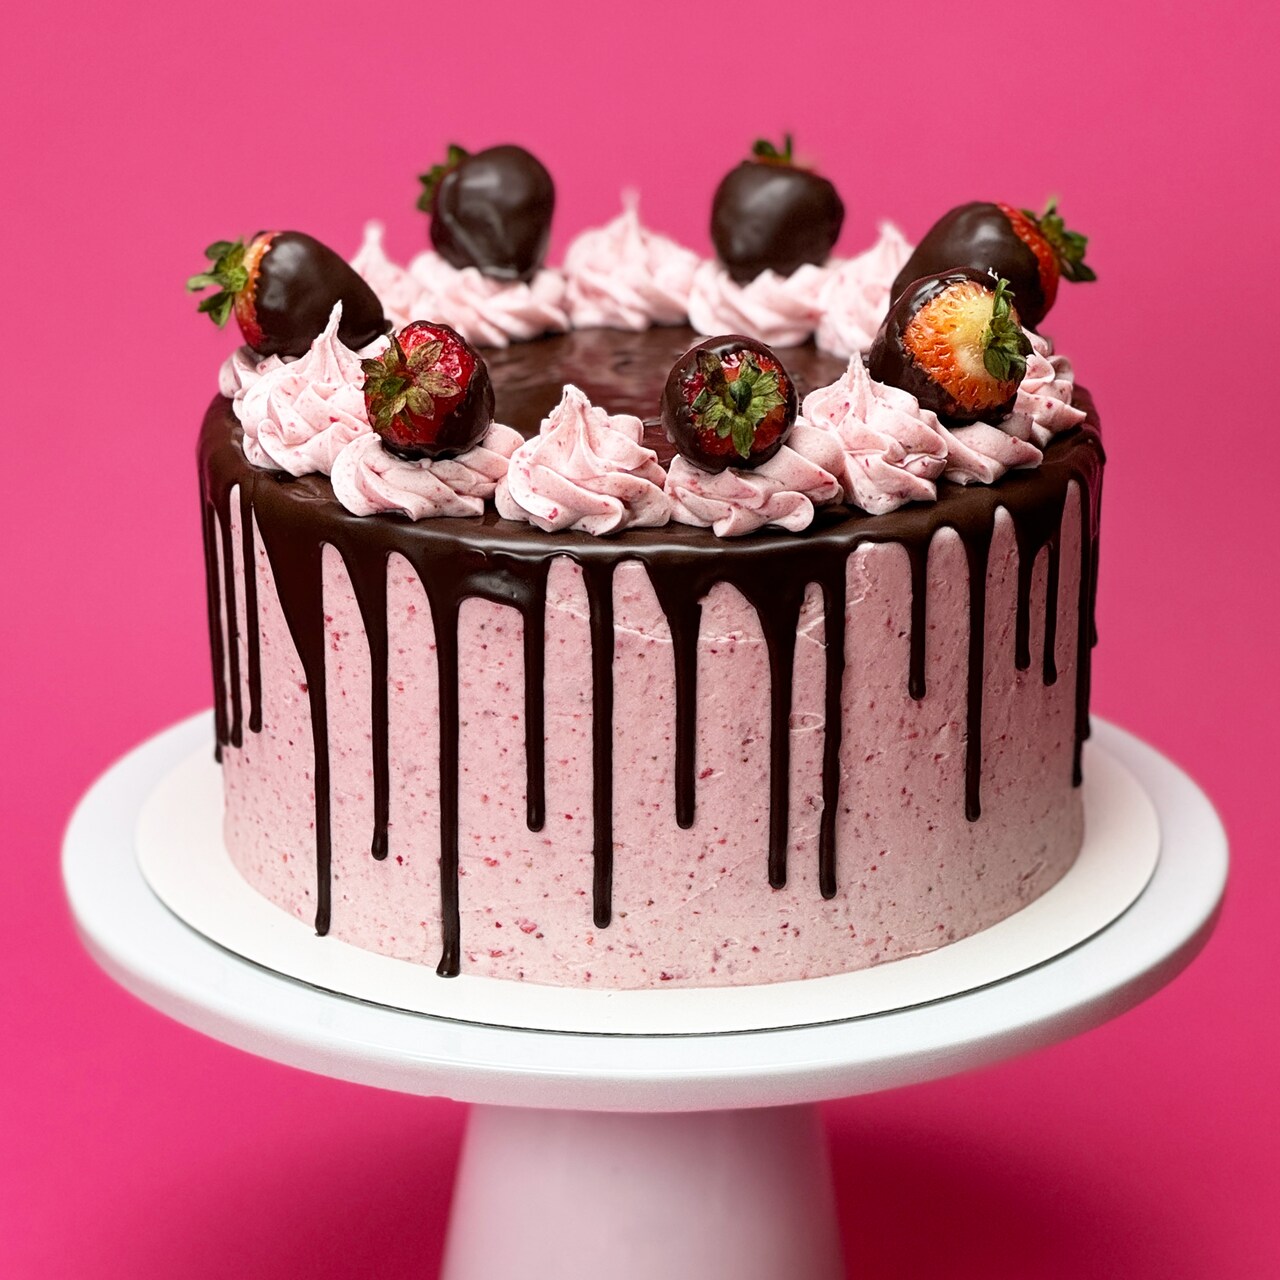 Chocolate Covered Strawberry Cake with Satin Ice